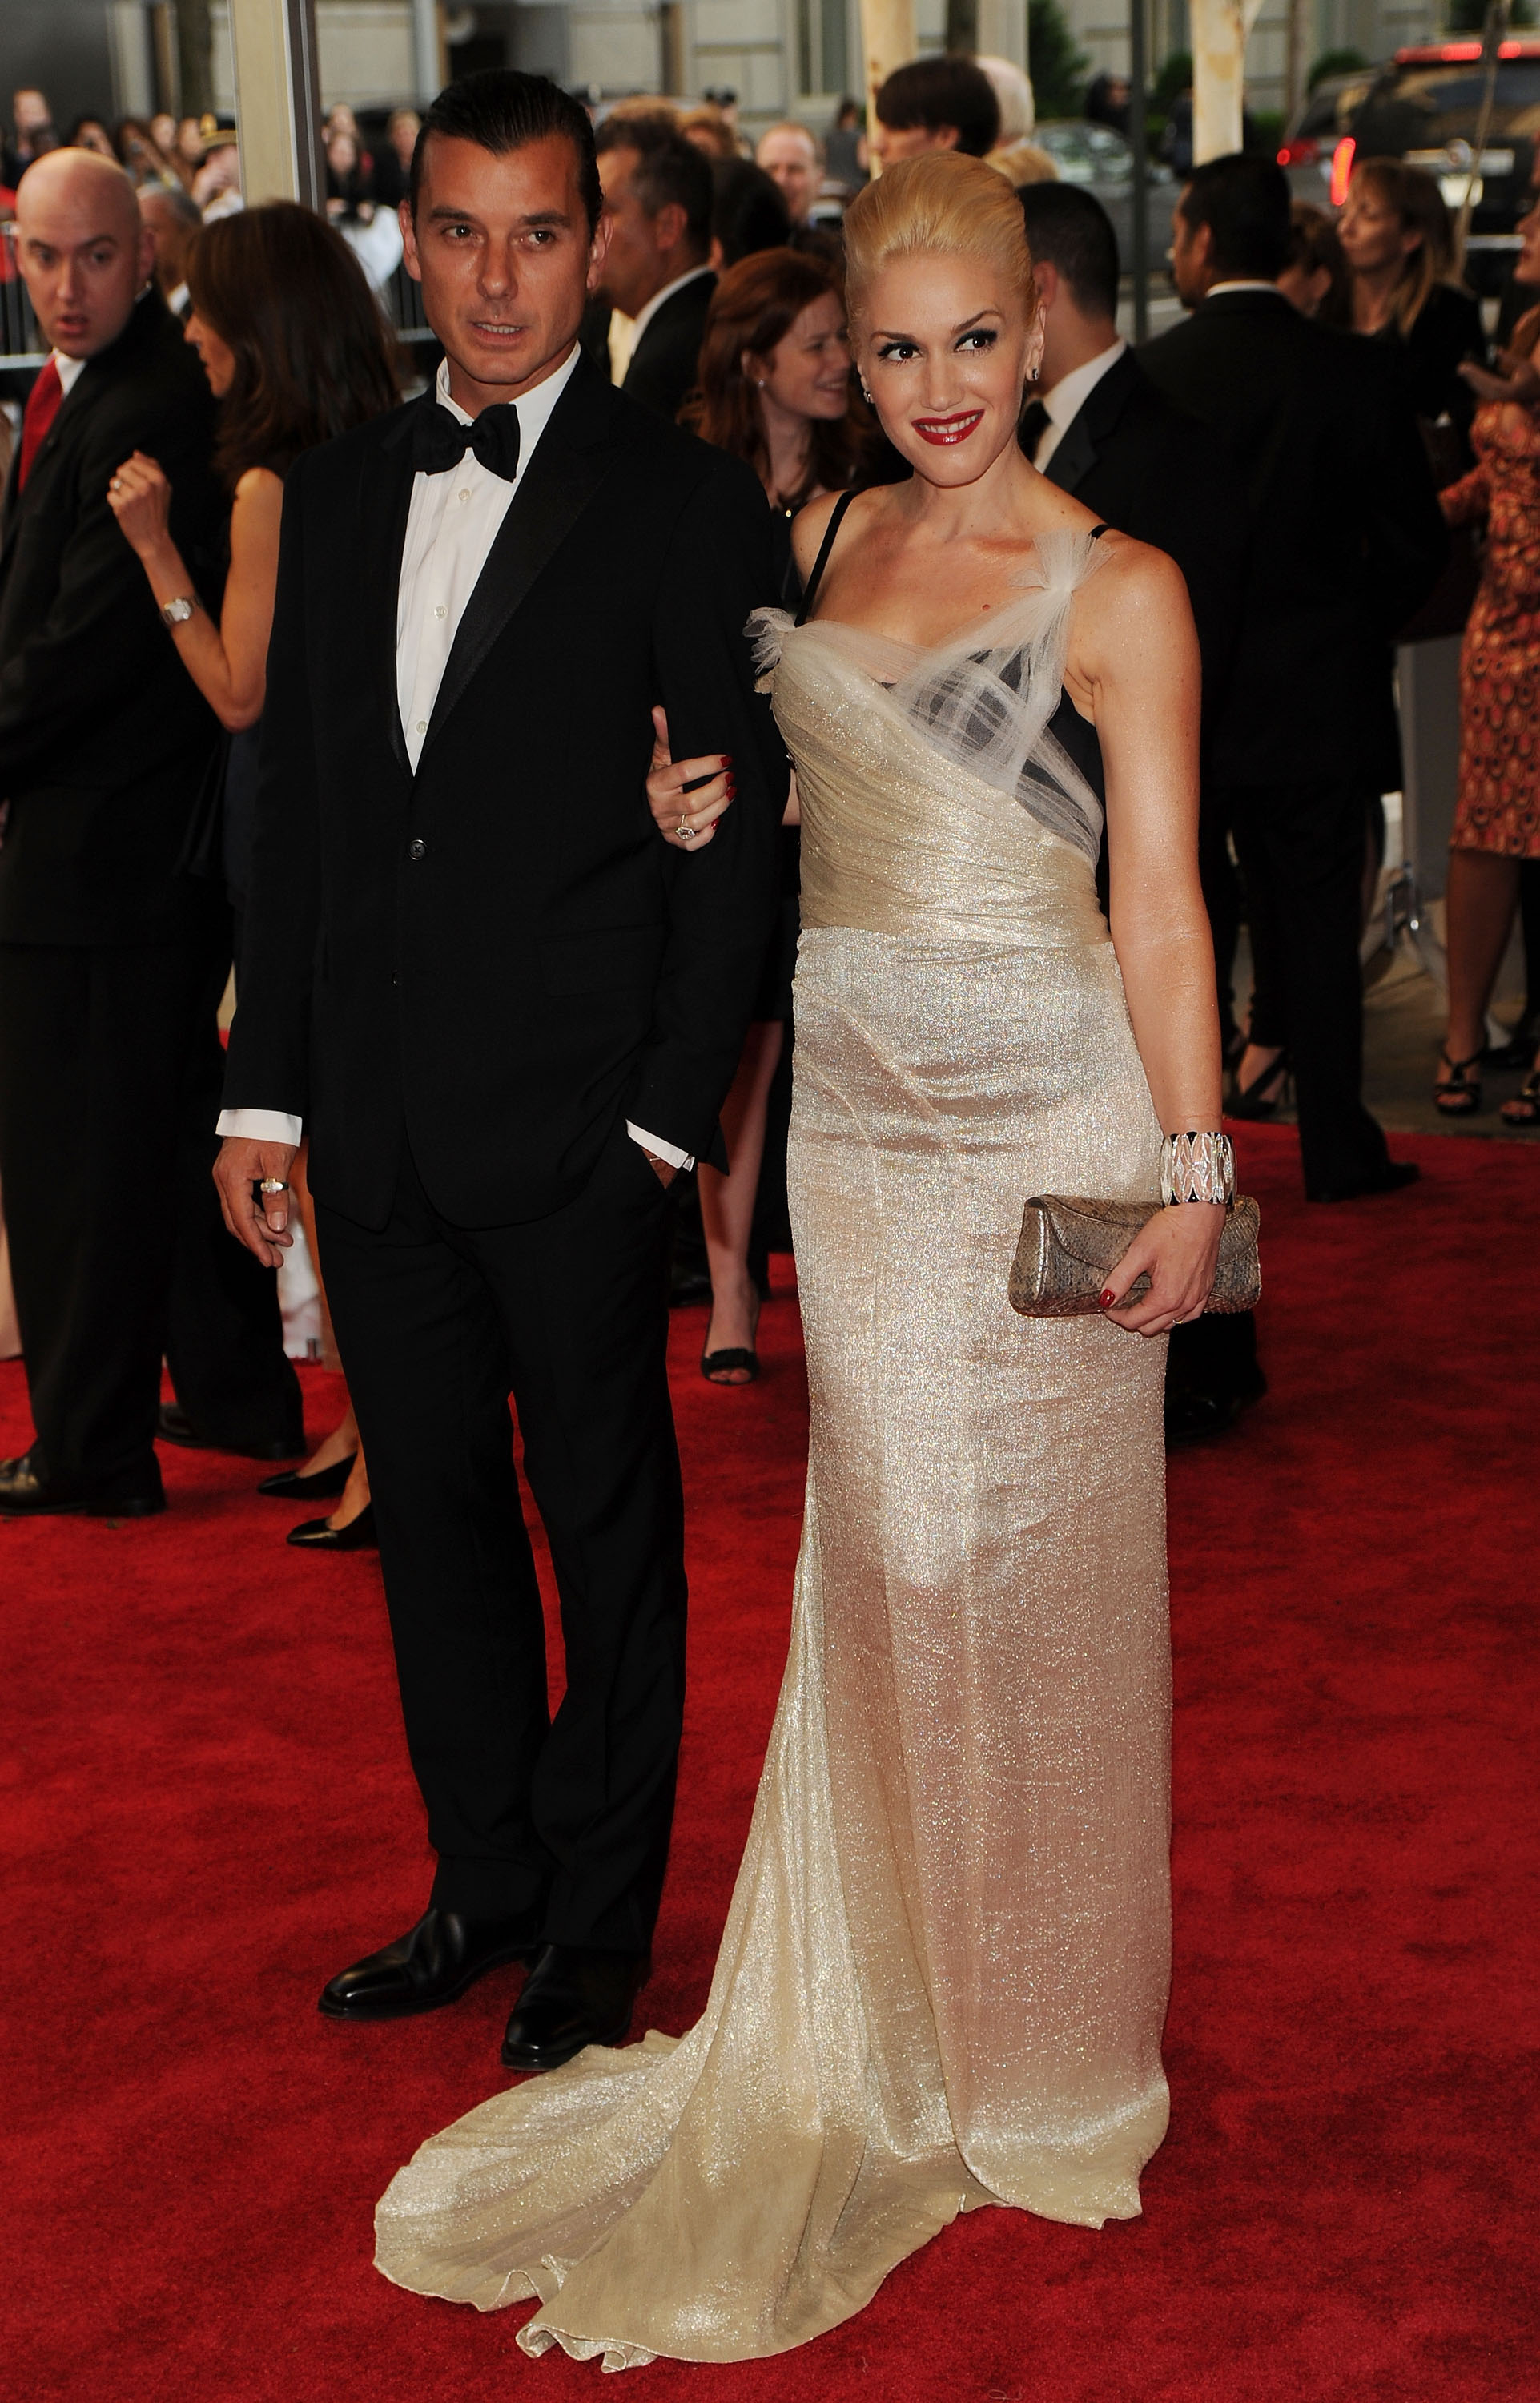 Two celebrities on red carpet; man in a suit and woman in a one-shoulder gown with a clutch